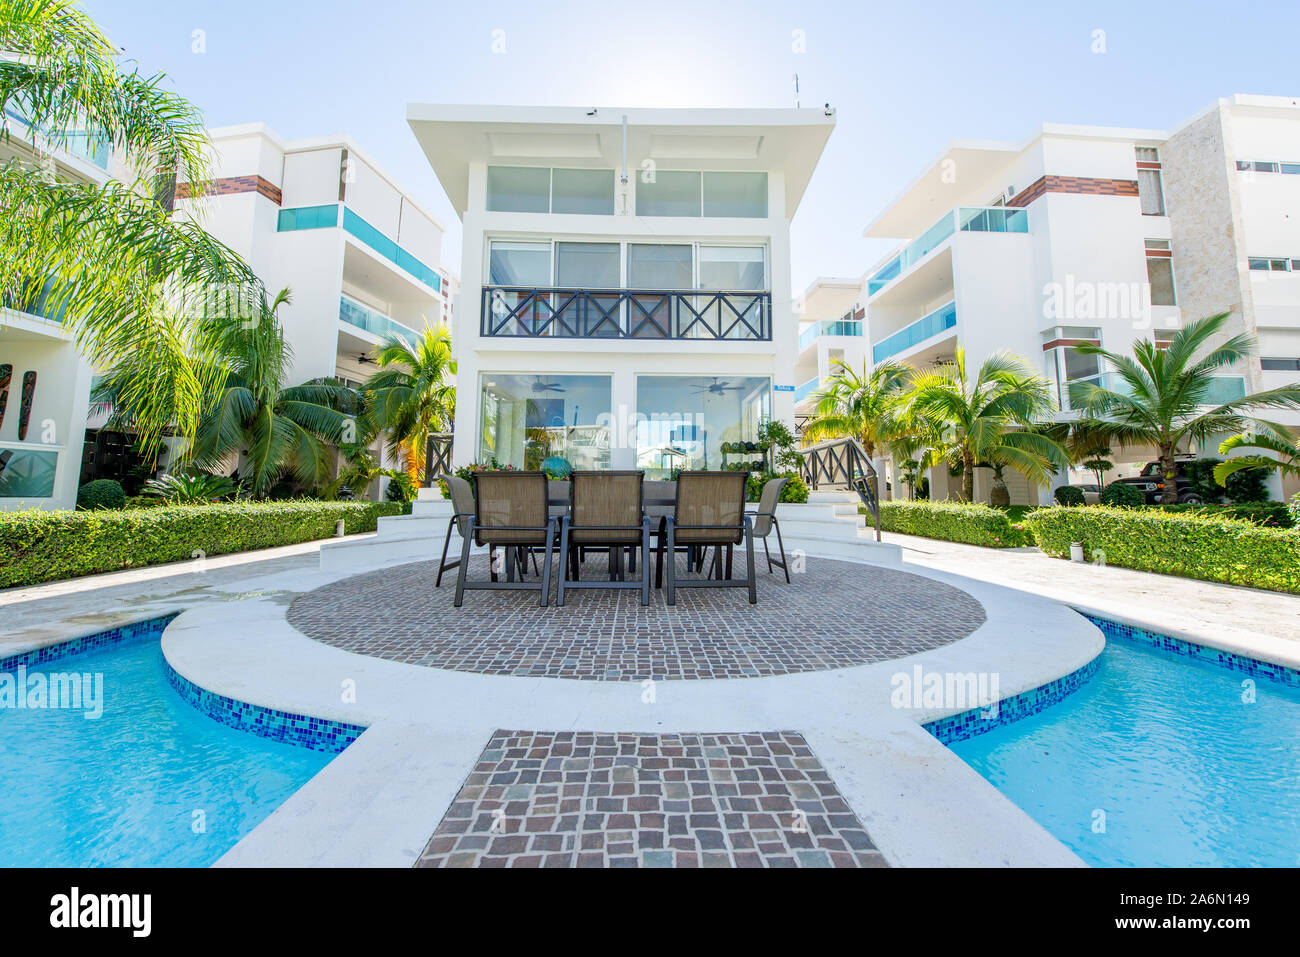 Punta Cana, La Altagracia / Dominican Republic - April 10 2014: Condominum Resort Looking with Palm Trees and Pools of Rich Strangers Stock Photo